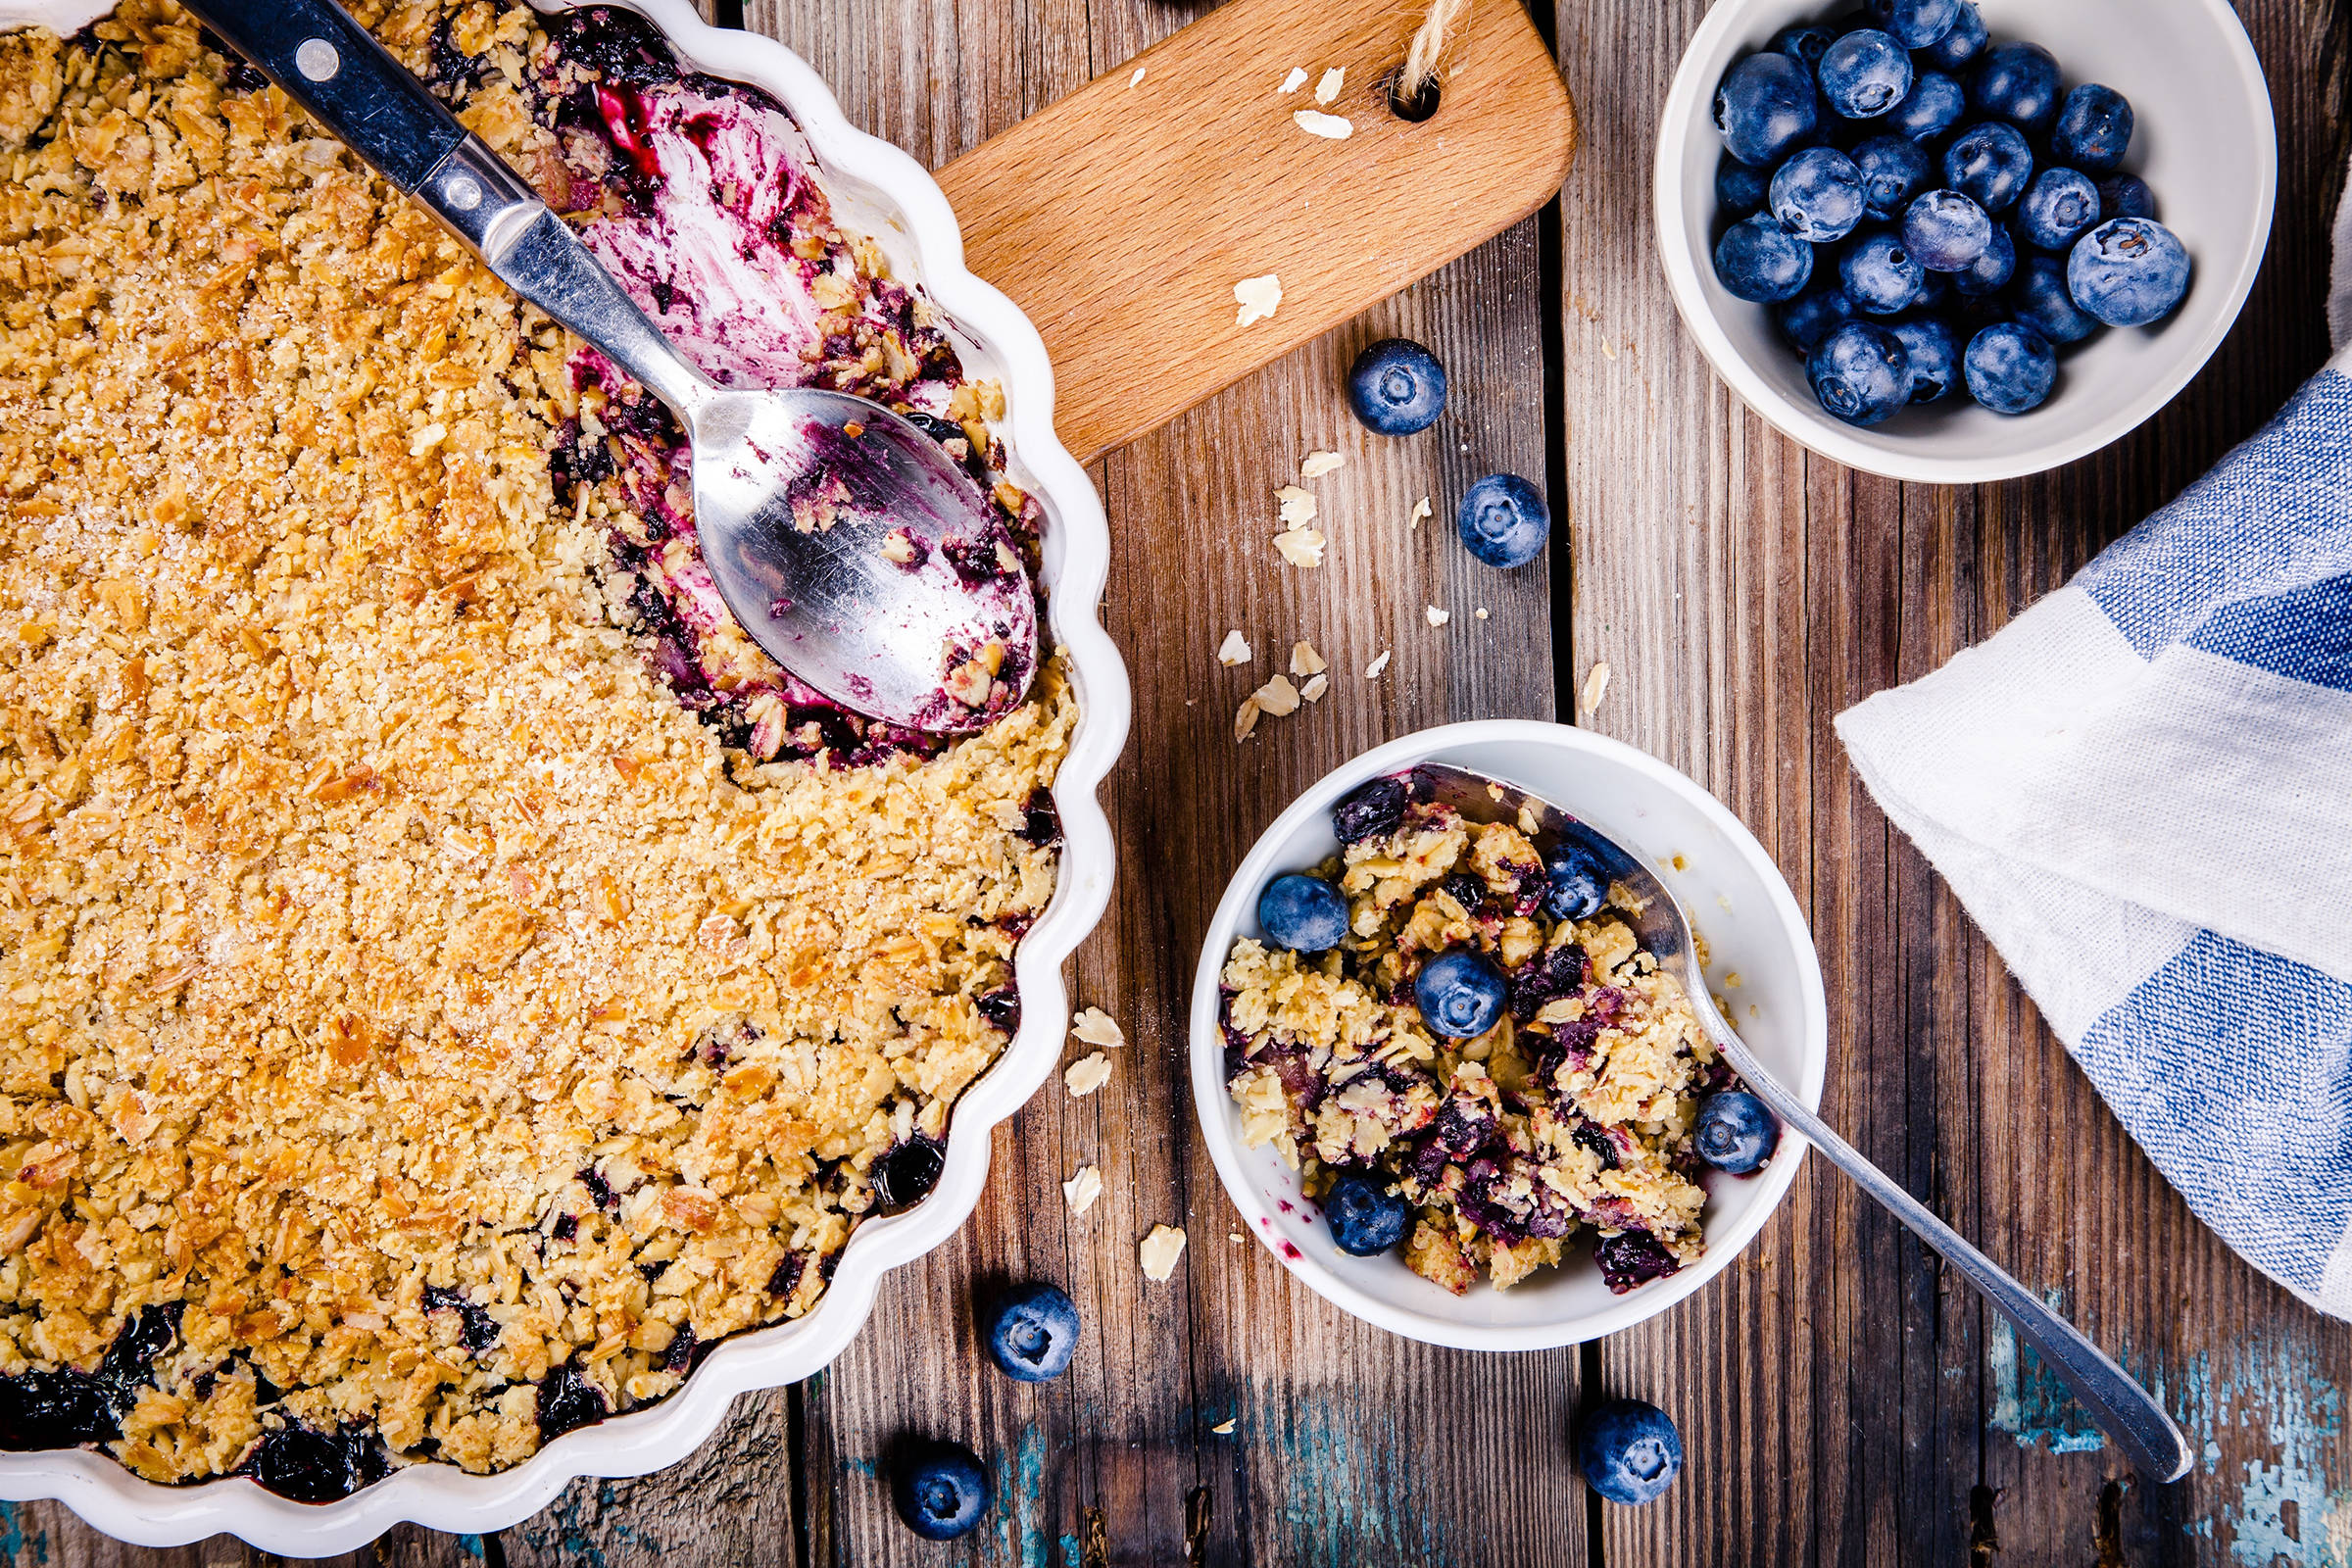 Blueberry crumble in a pie dish on wooden board with a serving in a dessert bowl served with fresh blueberries.